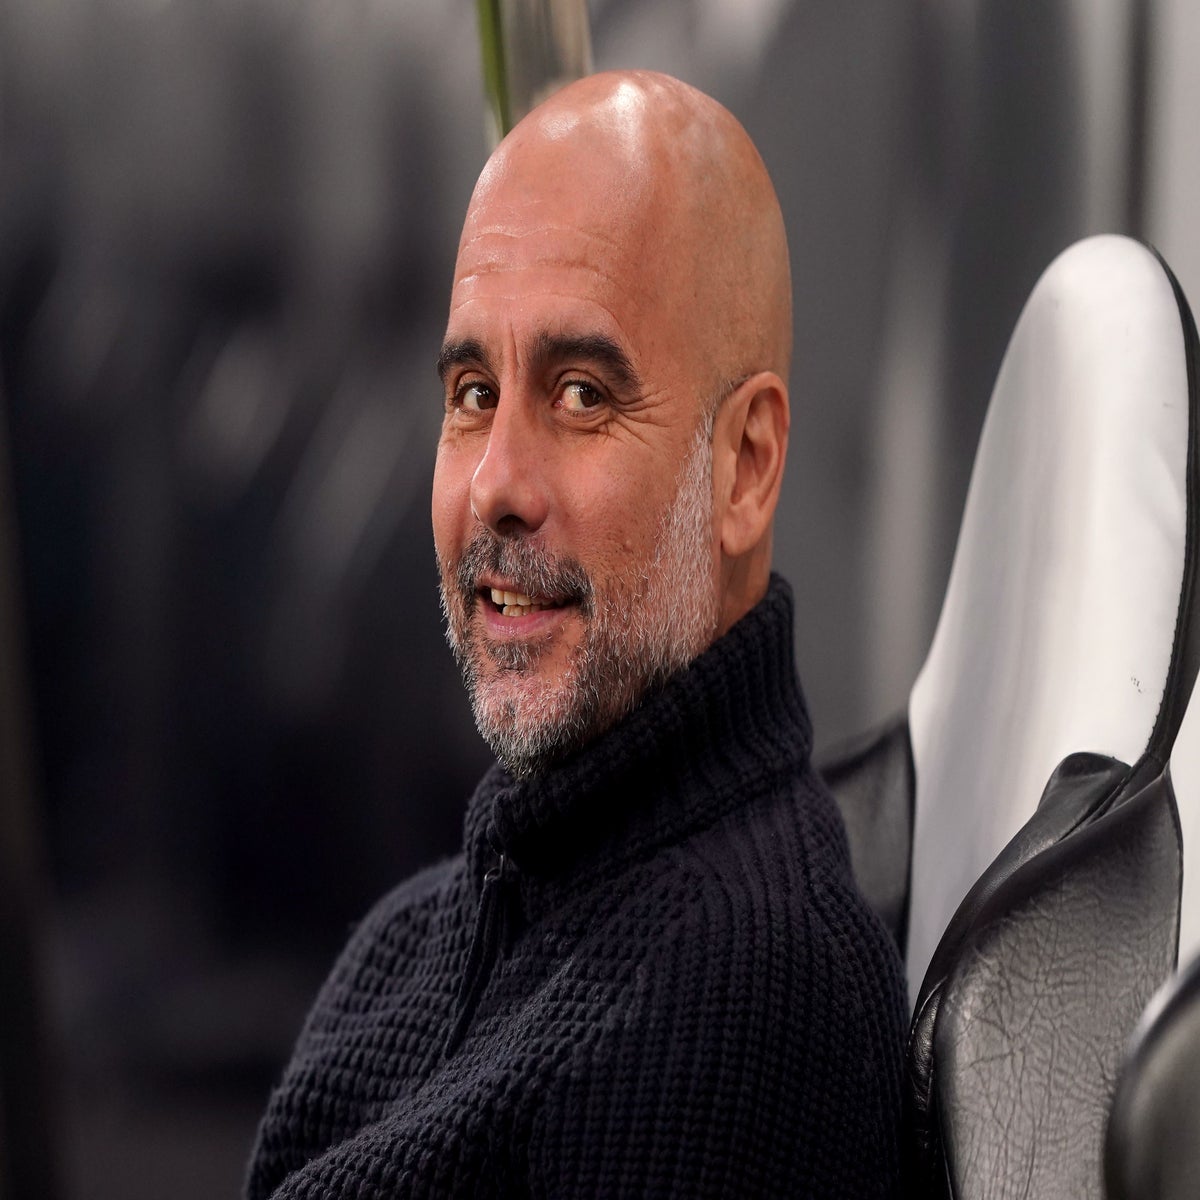 Guardiola delighted by “significant” win